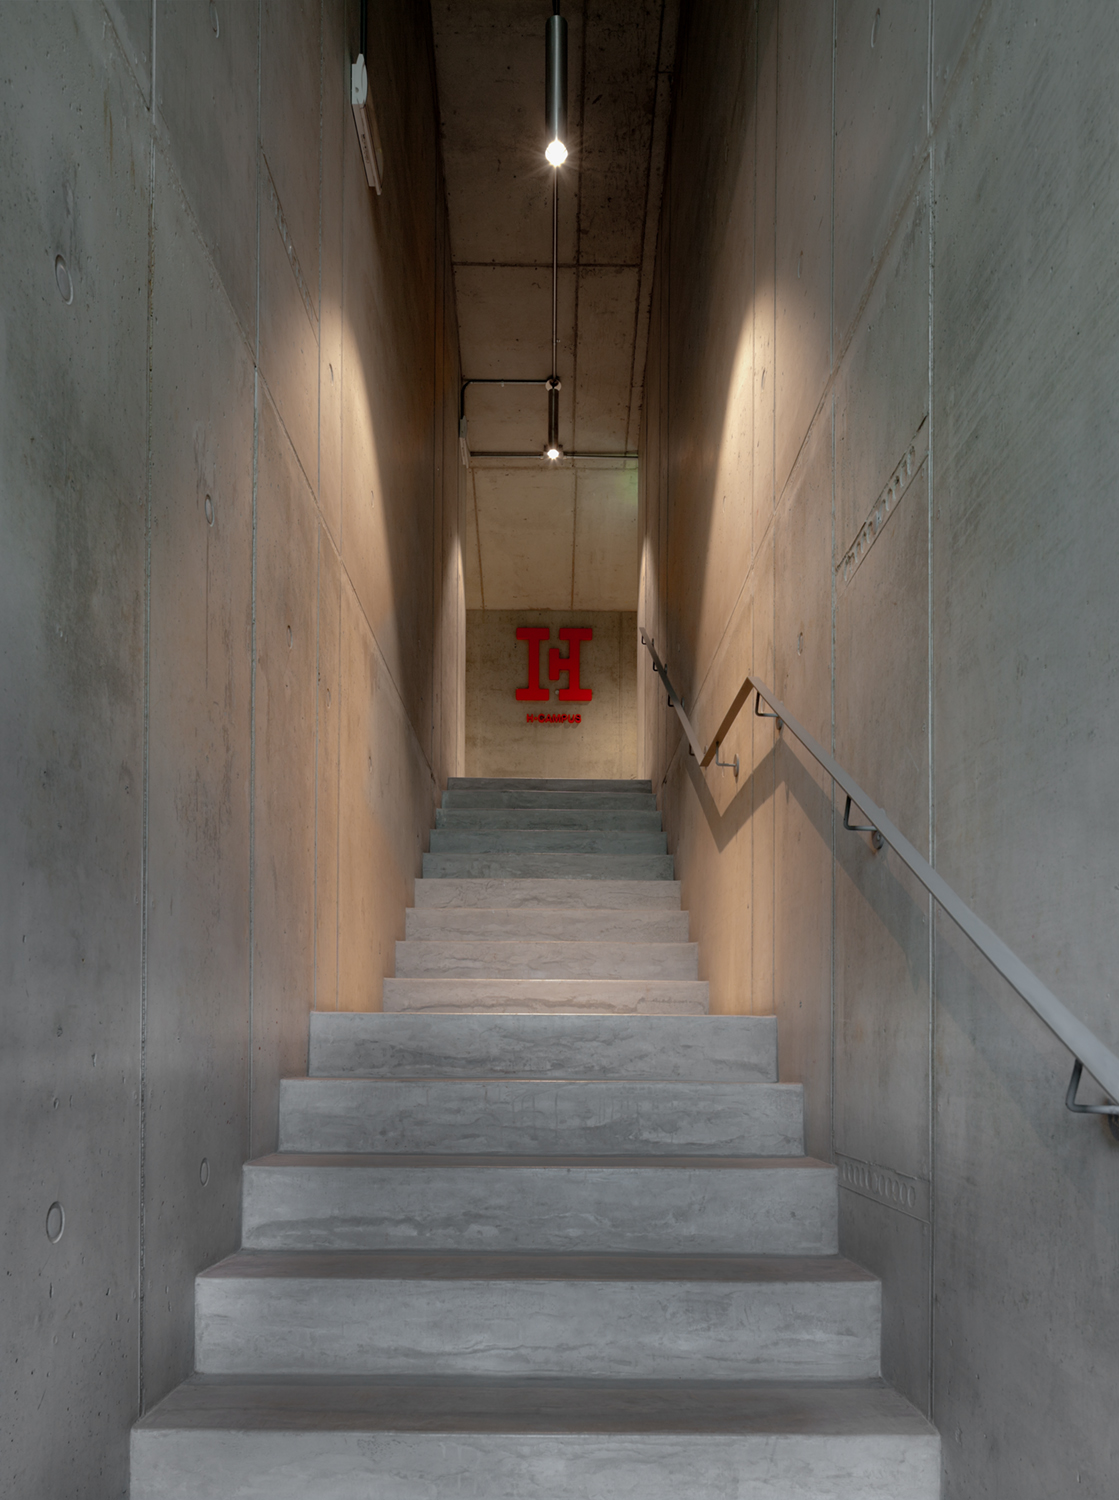 Microverlay®, low thickness concrete resin coating, gray finish. H-Farm. Roncade, Italy